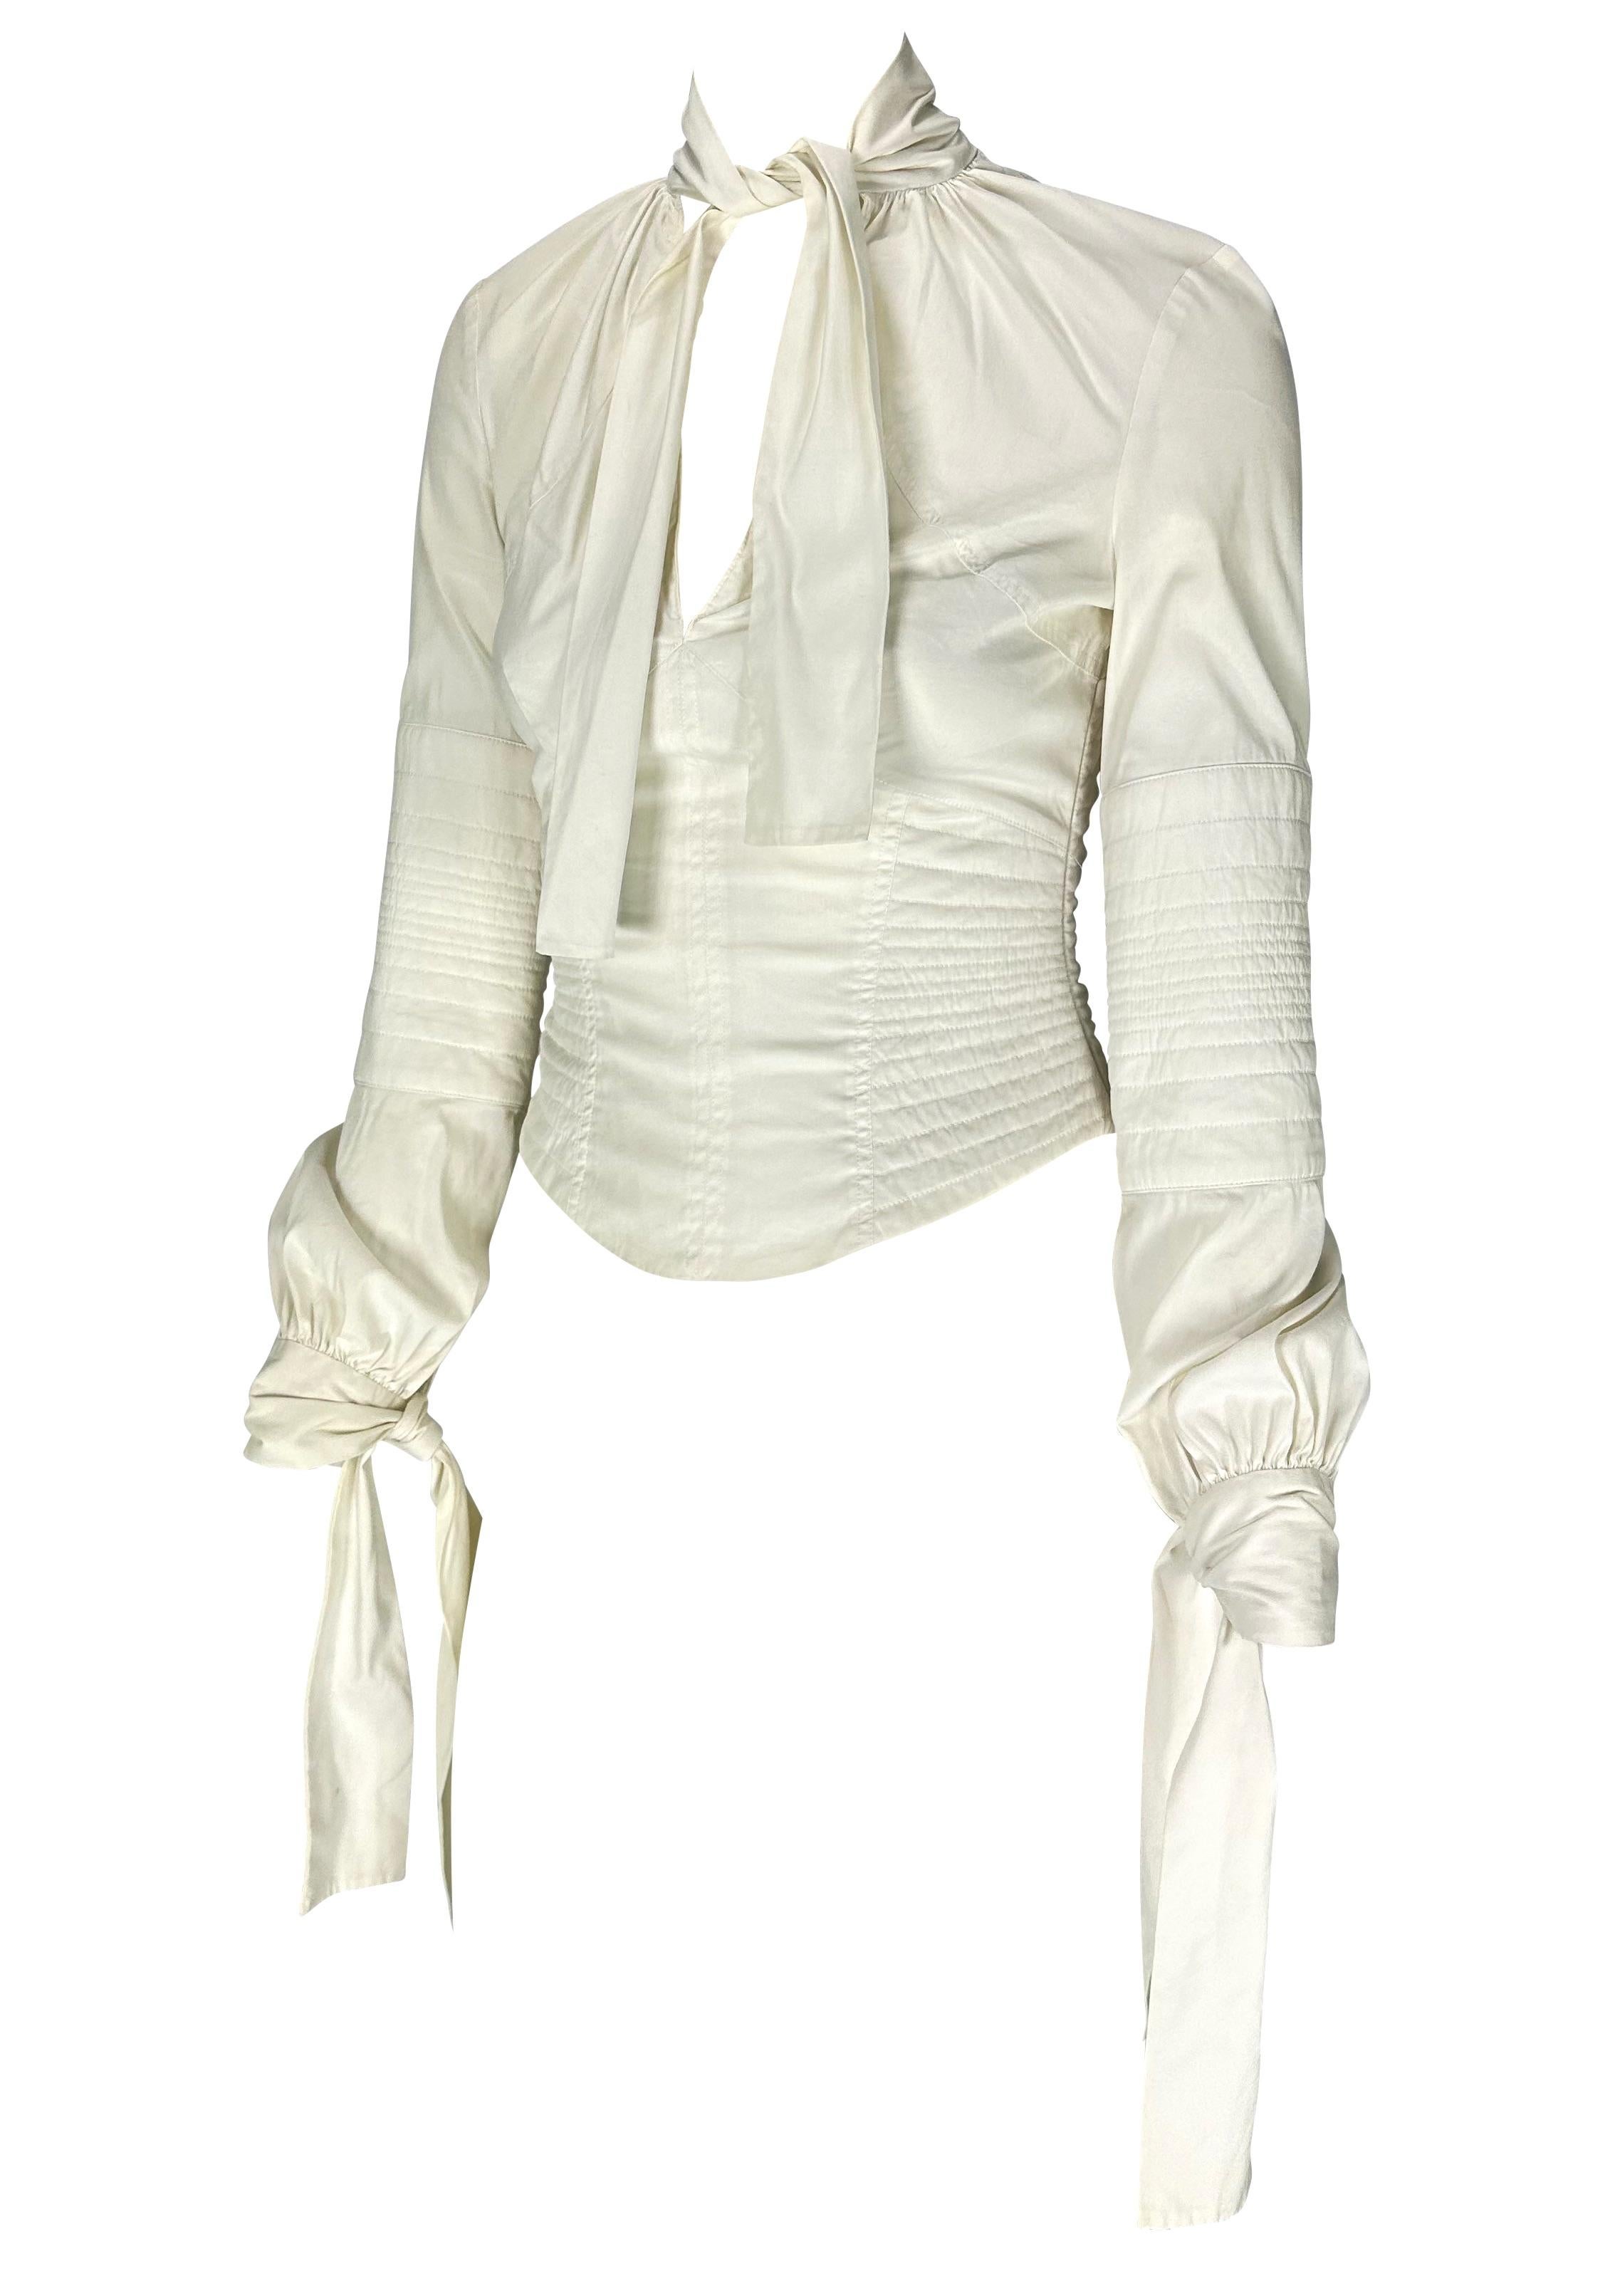 Presenting a white cotton Gucci blouse designed by Tom Ford. From the Fall/Winter 2003 collection, this beautiful top features quilted details on the body creating a corset silhouette. With a deep neckline, this top has ties that wrap around the